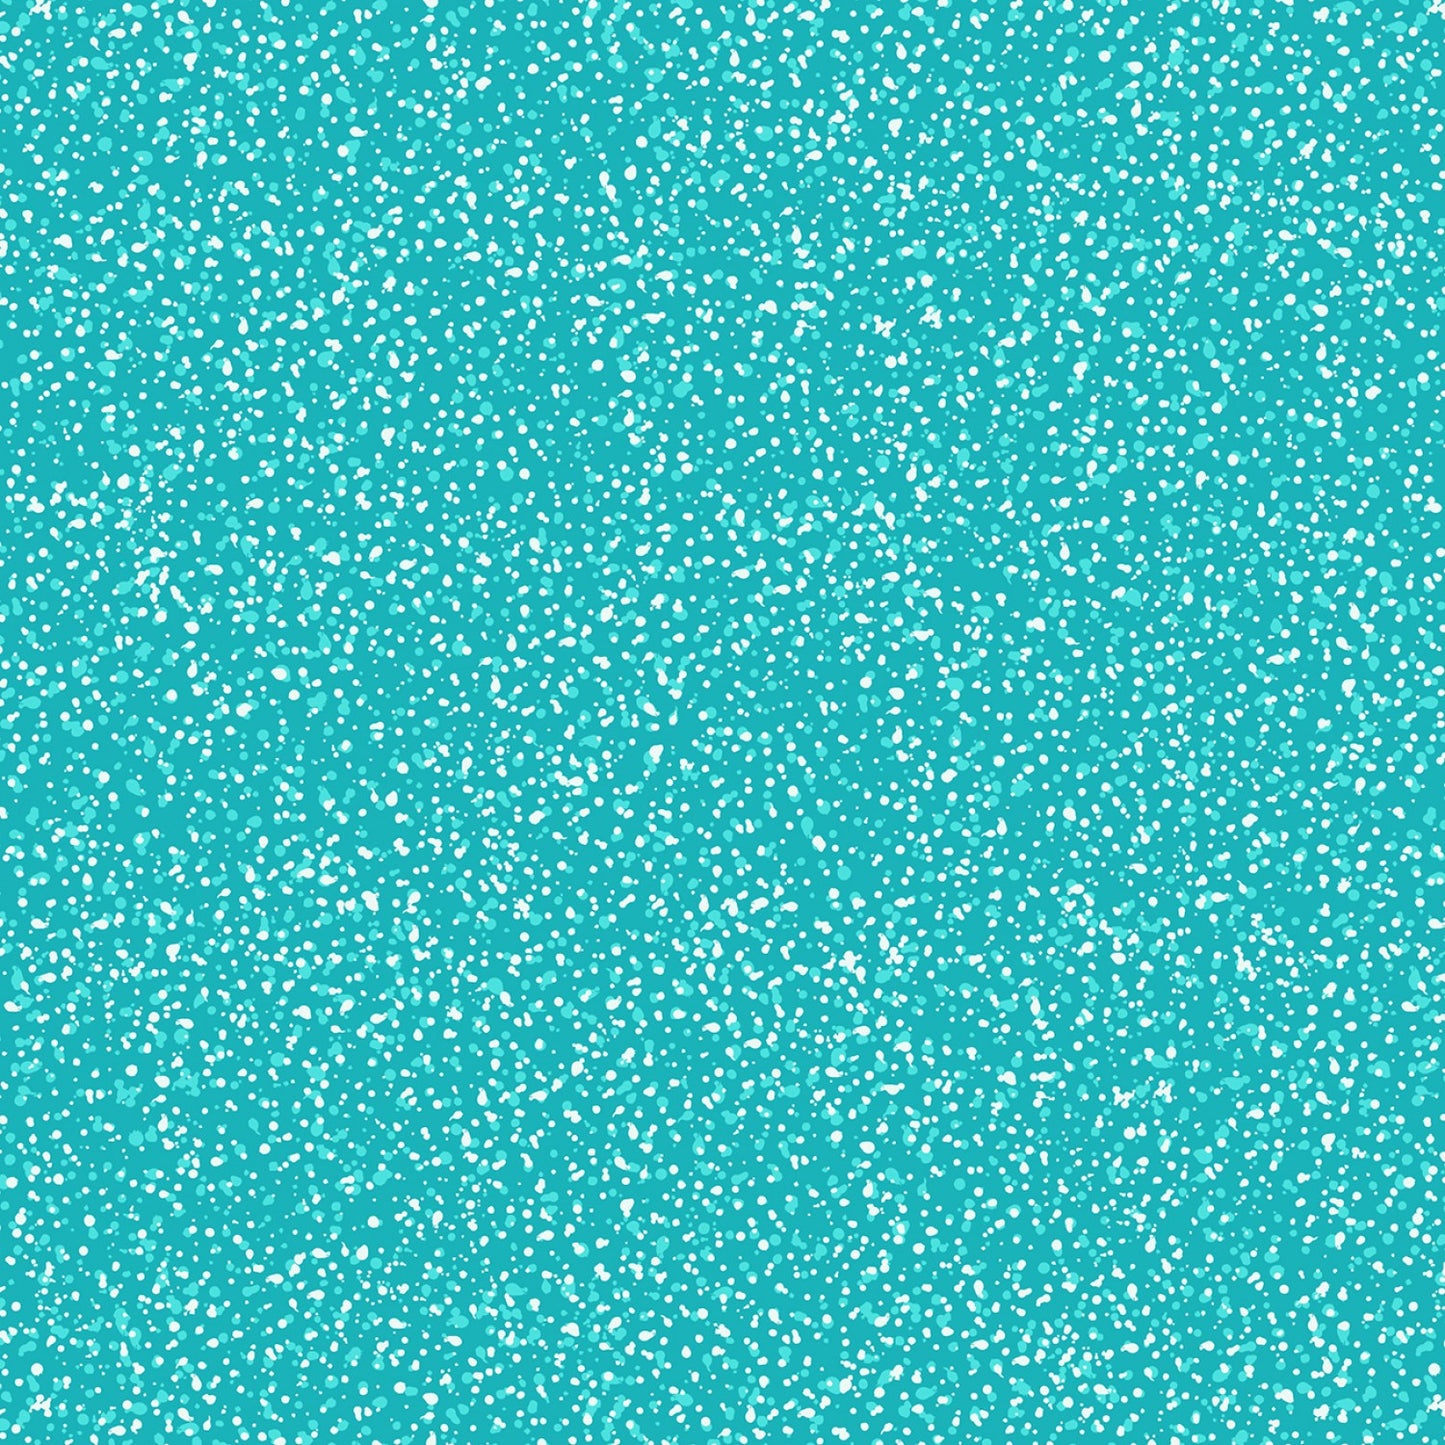 Ocean Glow (Glow in the Dark) Bioluminescence on Turquoise    A780.1 Cotton Woven Fabric